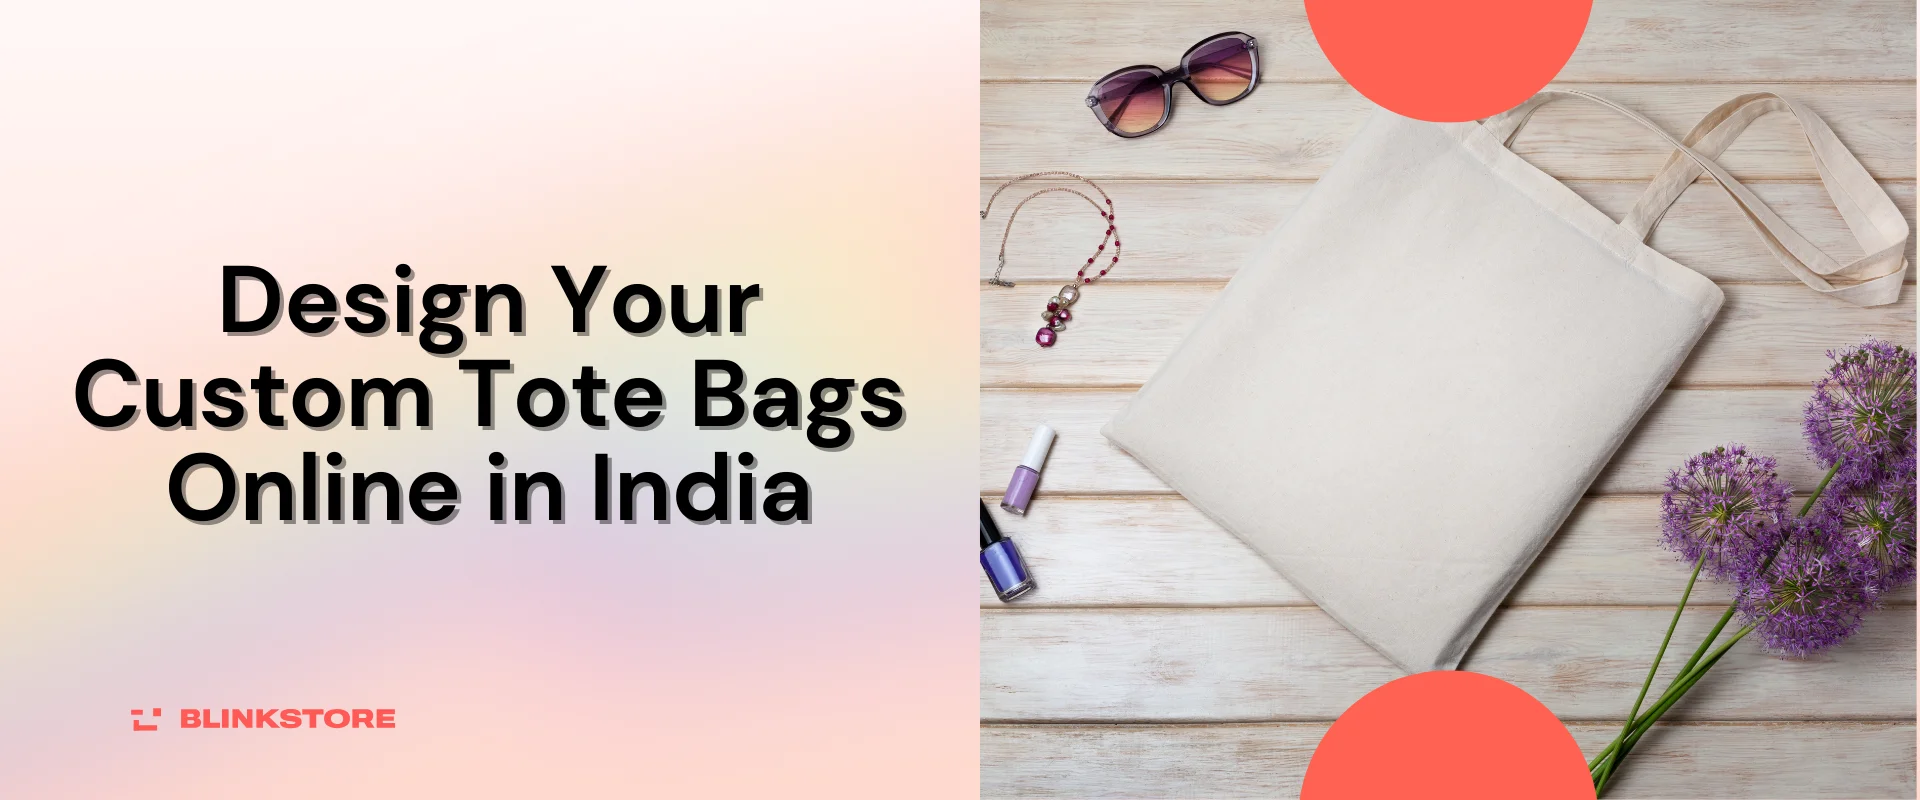 8 Steps to Design Your Custom Tote Bags Online in India